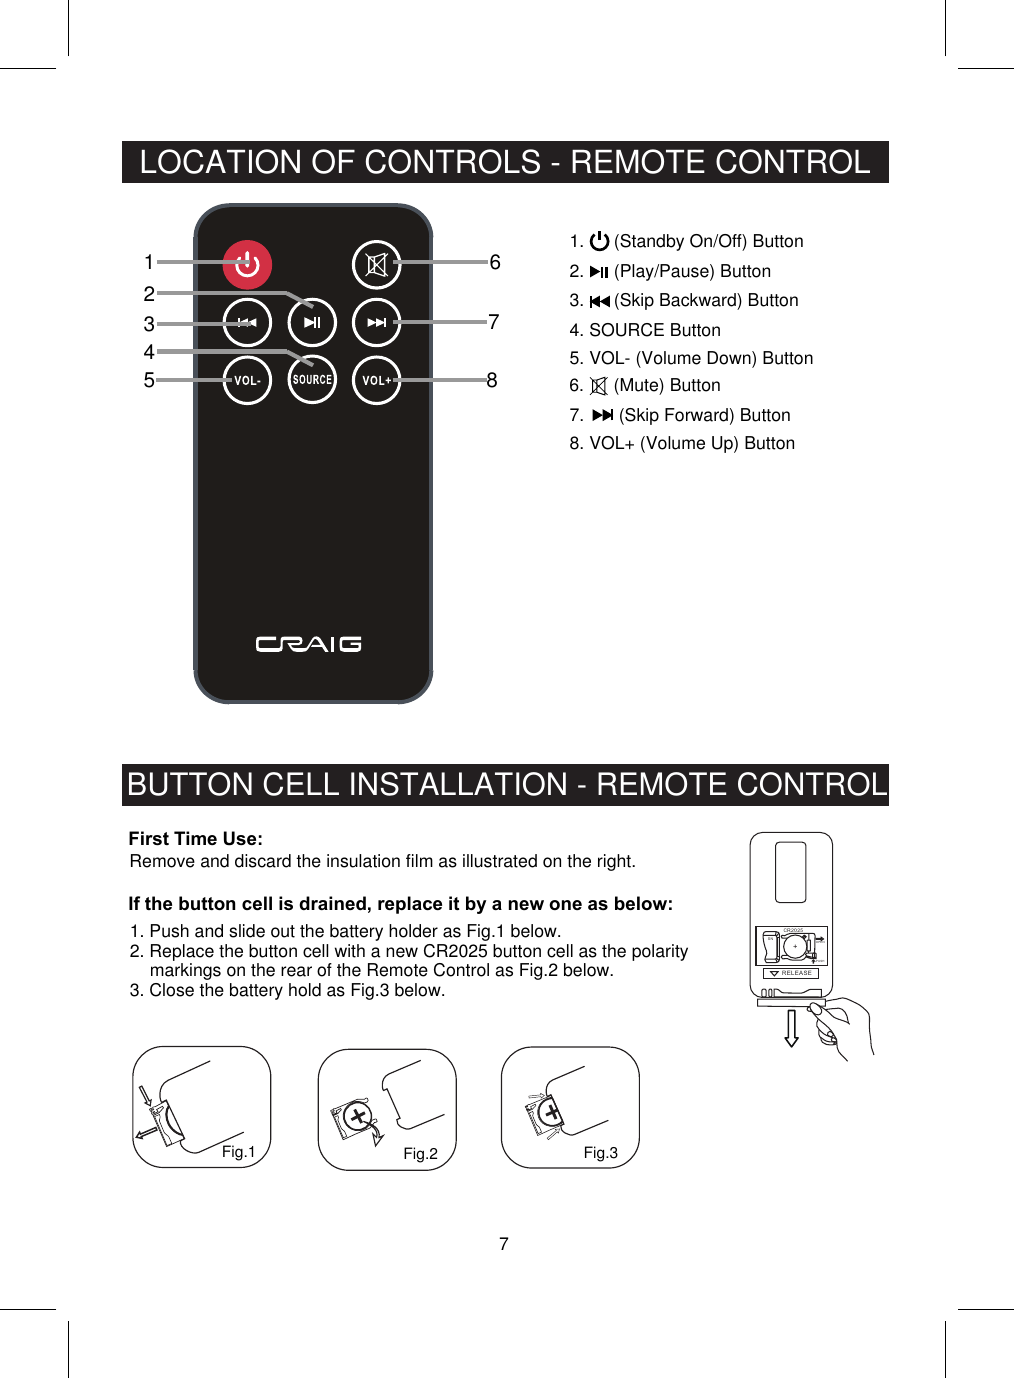 Remove and discard the insulation film as illustrated on the right.7LOCATION OF CONTROLS - REMOTE CONTROLBUTTON CELL INSTALLATION - REMOTE CONTROL123456786.      (Mute) ButtonRELEA SEPUSHOPENR2025C+SNFig.1 Fig.2 Fig.31.      (Standby On/Off) Button2.      (Play/Pause) Button3.      (Skip Backward) Button4. SOURCE Button5. VOL- (Volume Down) Button7.       (Skip Forward) Button8. VOL+ (Volume Up) ButtonFirst Time Use:If the button cell is drained, replace it by a new one as below:1. Push and slide out the battery holder as Fig.1 below.2. Replace the button cell with a new CR2025 button cell as the polaritymarkings on the rear of the Remote Control as Fig.2 below.3. Close the battery hold as Fig.3 below.